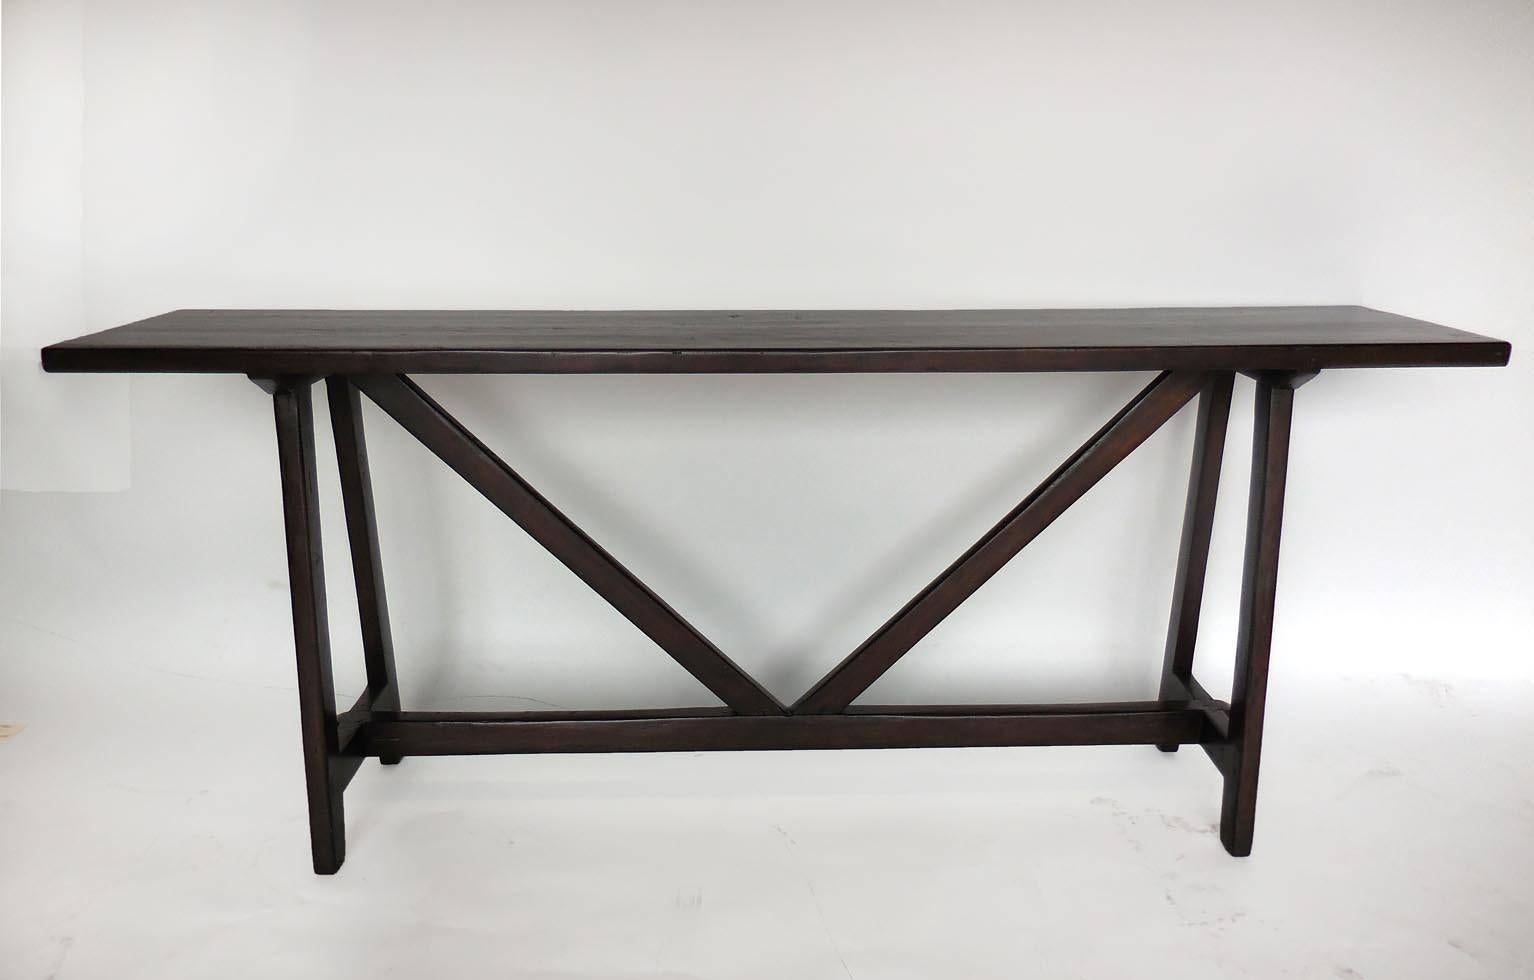 Custom console table. Can be made in any size, in Oak, Walnut or Mahogany in a variety of finishes. Shown here in Walnut with a light distress and dark finish. Made in Los Angeles by Dos Gallos Studio.
PRICES ARE SUBJECT TO CHANGE. PLEASE INQUIRE